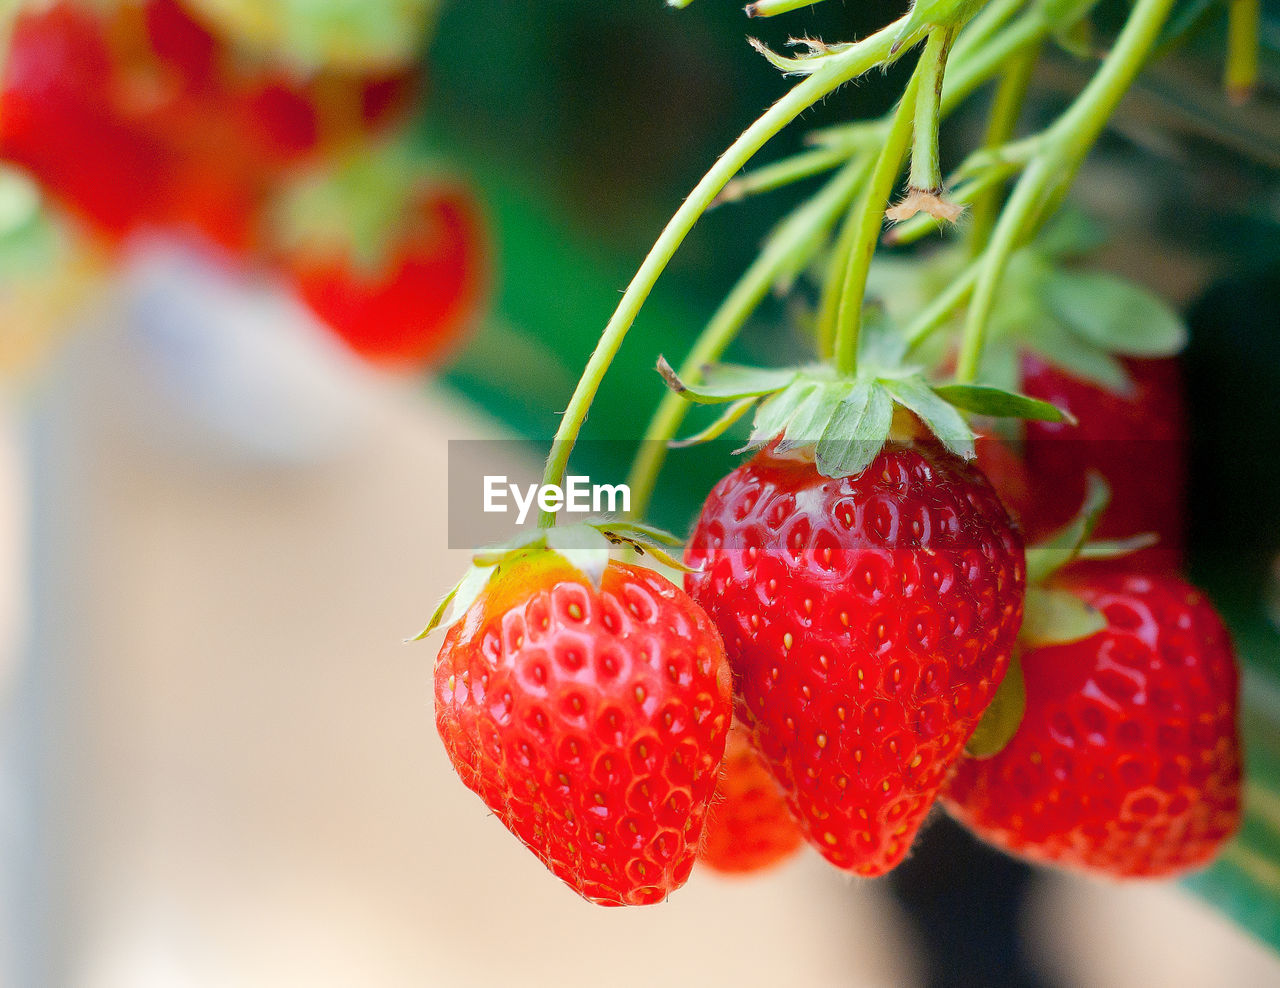 CLOSE-UP OF STRAWBERRIES ON RED BERRIES